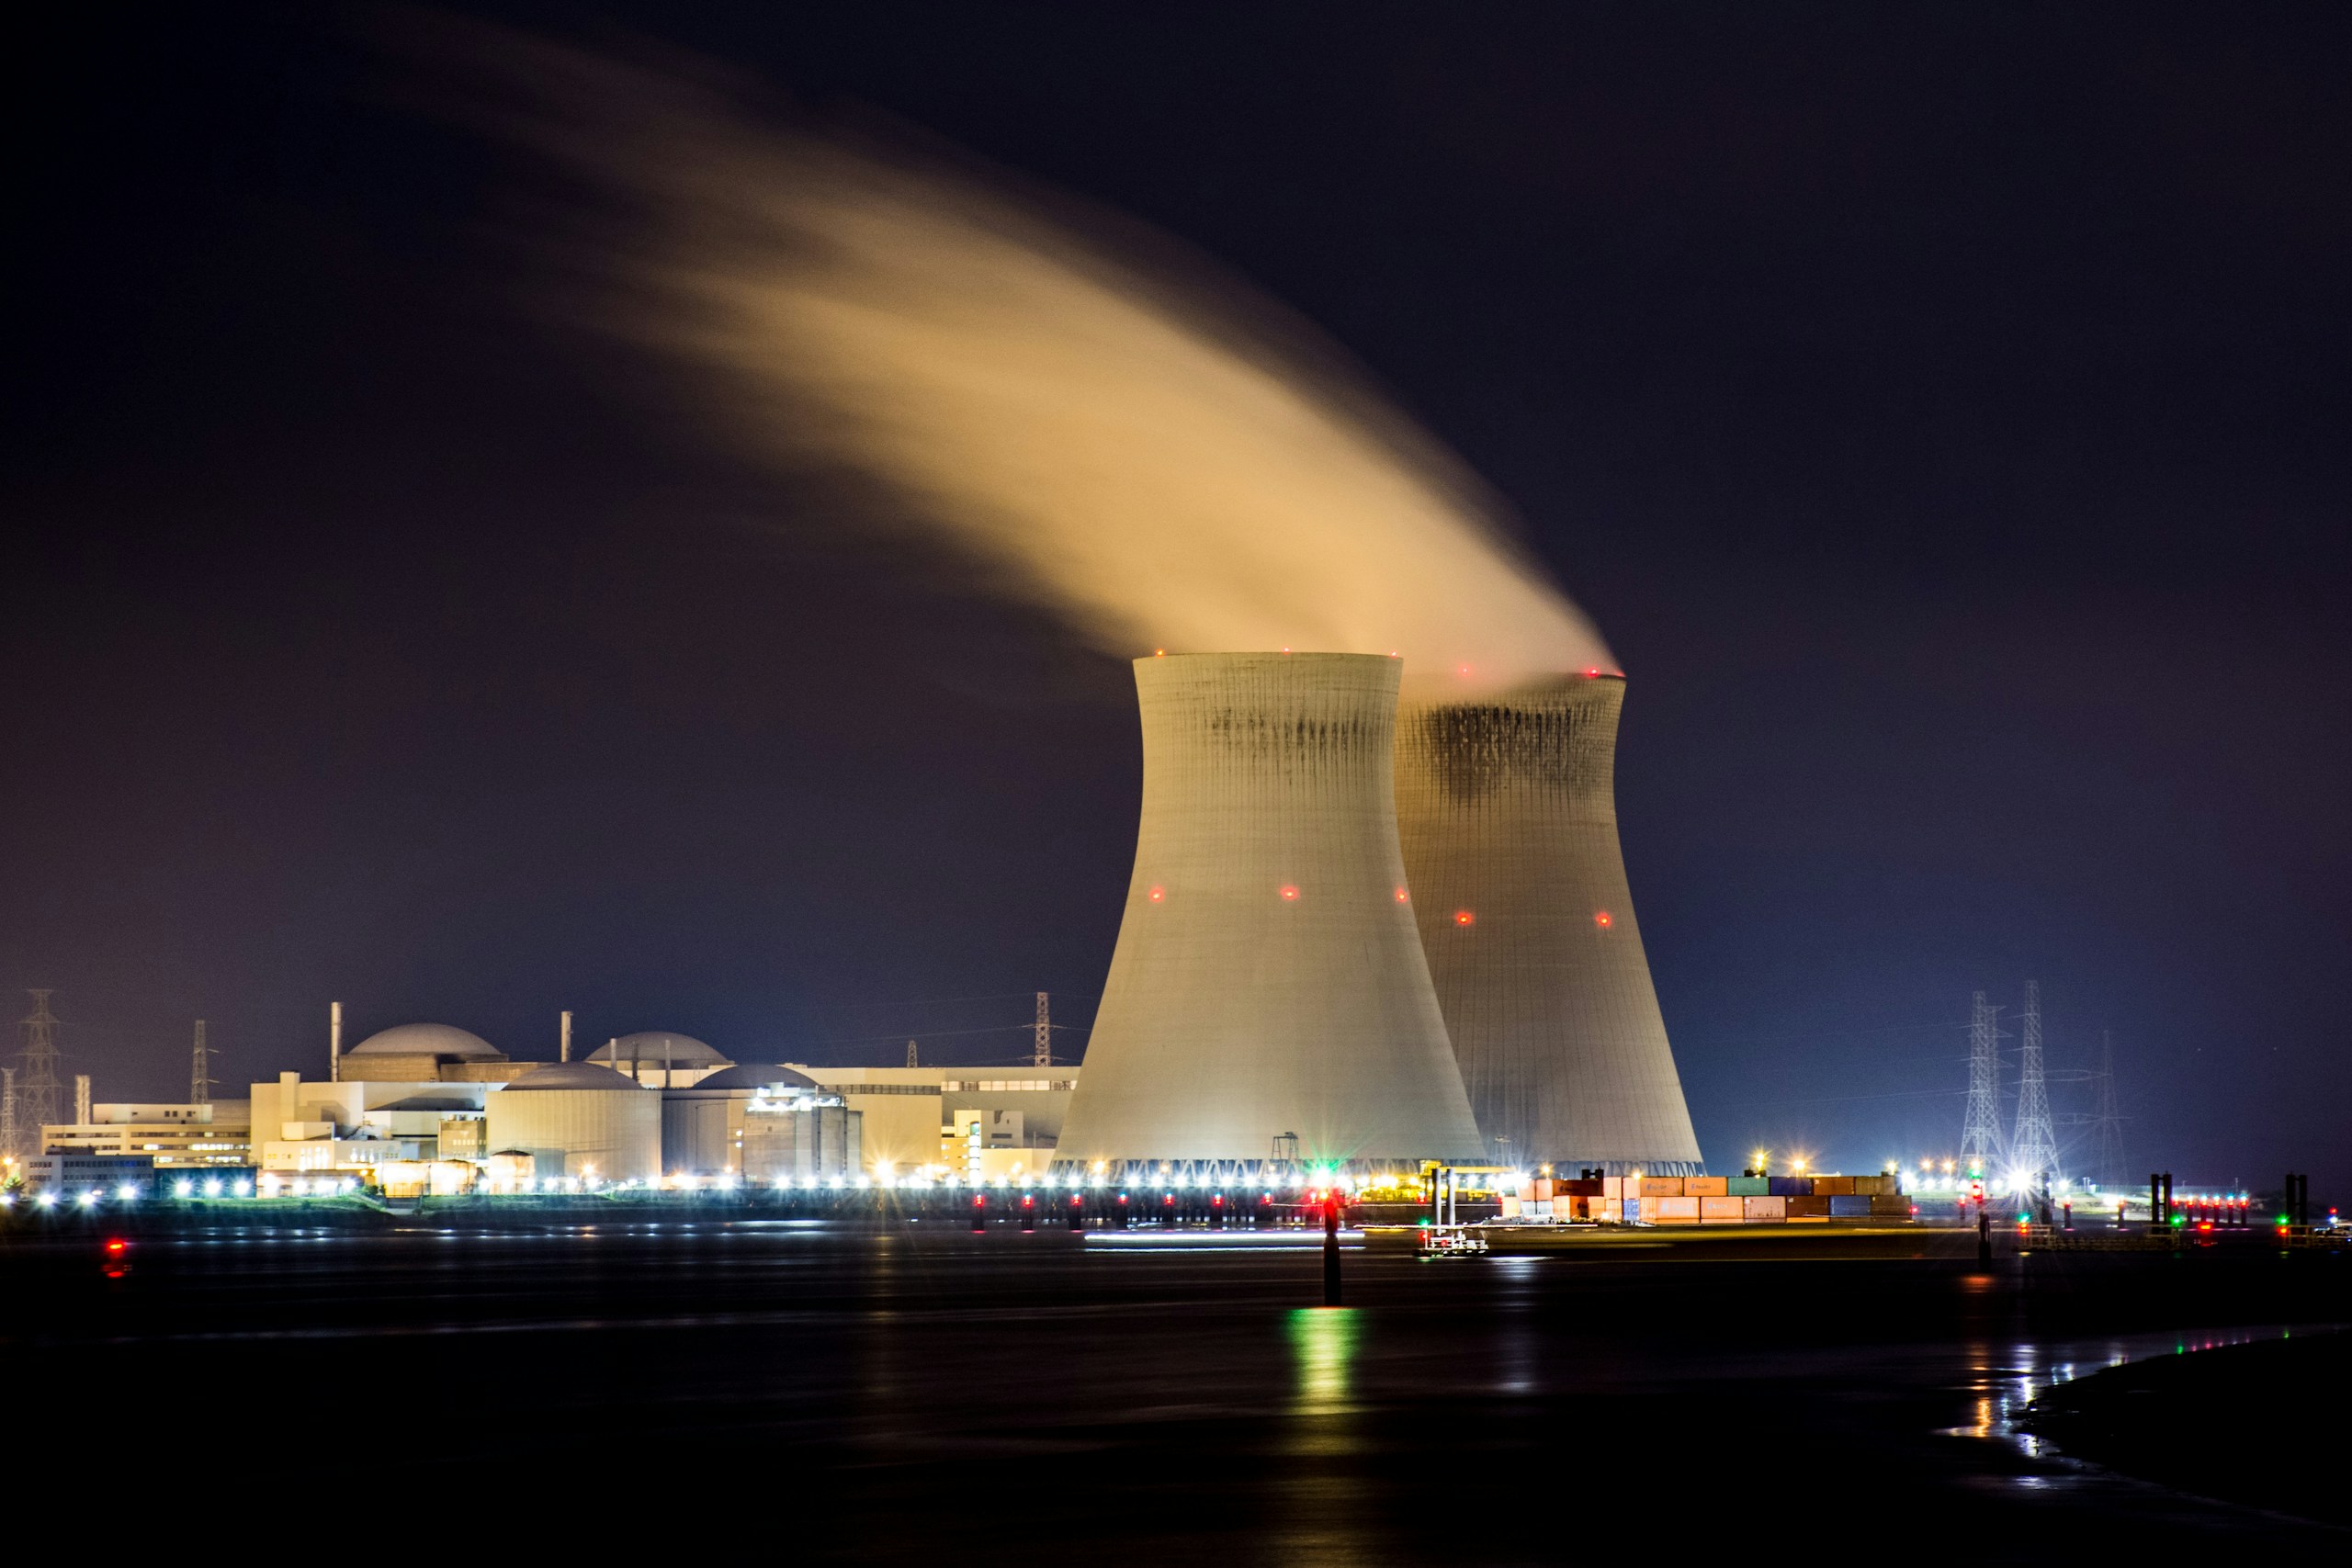 Why I am not worried about Japan’s Nuclear reactors – re-post by Morgsatlarge